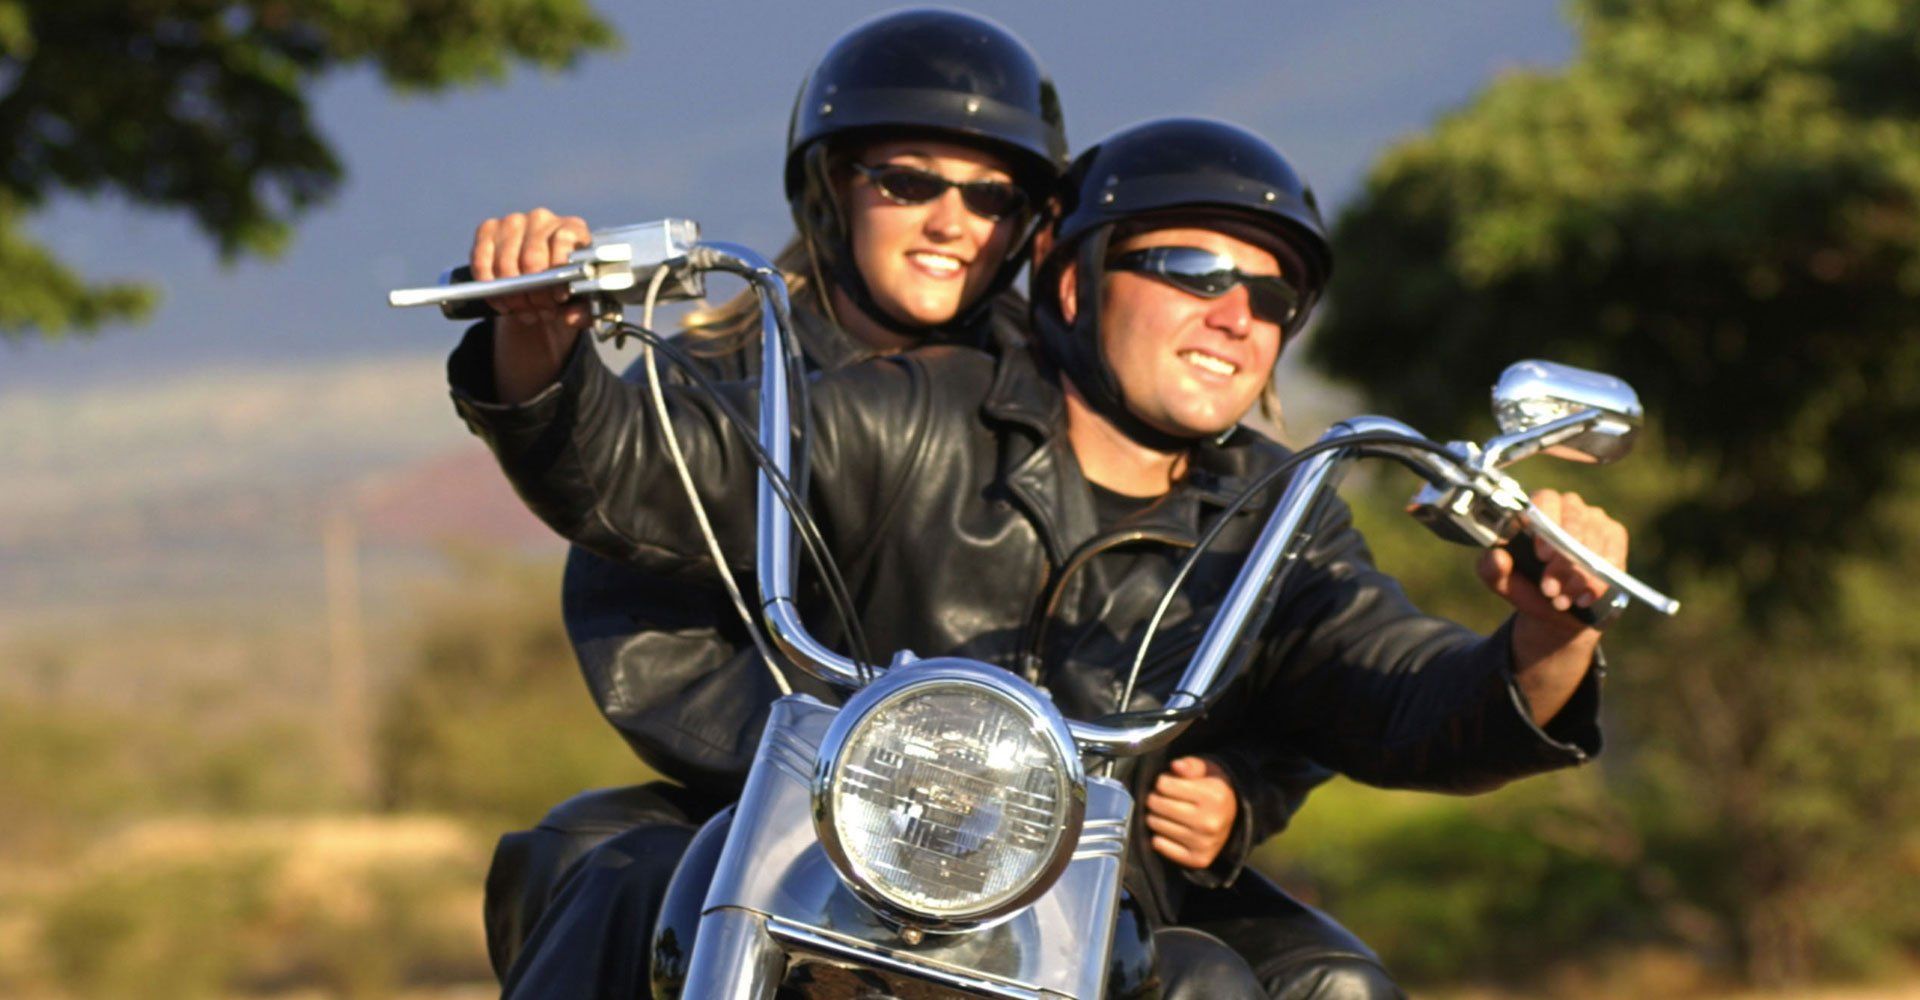 Man and woman wearing helmet and sun glasses riding a motorcycle